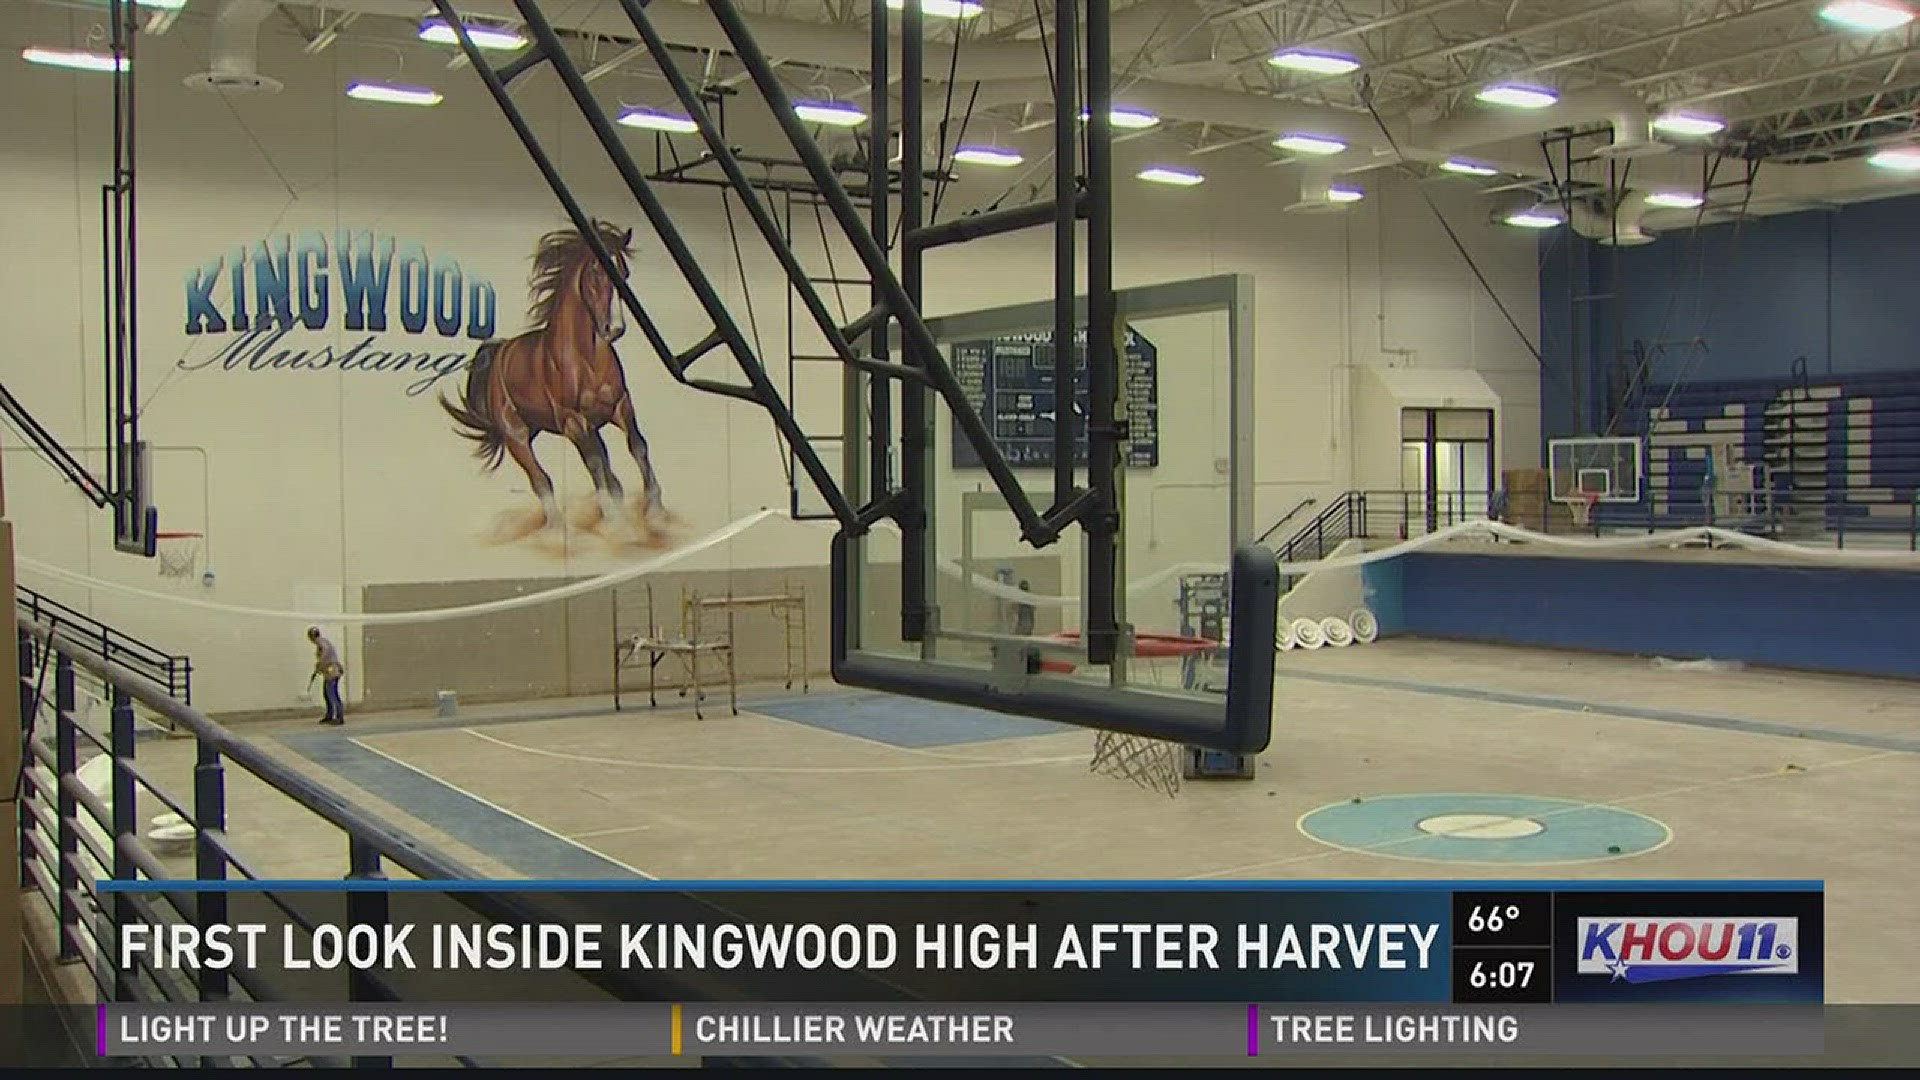 The Kingwood High football team has come back strong after losing a lot in Hurricane Harvey and this season the team has made state playoffs, a first in 30 years.